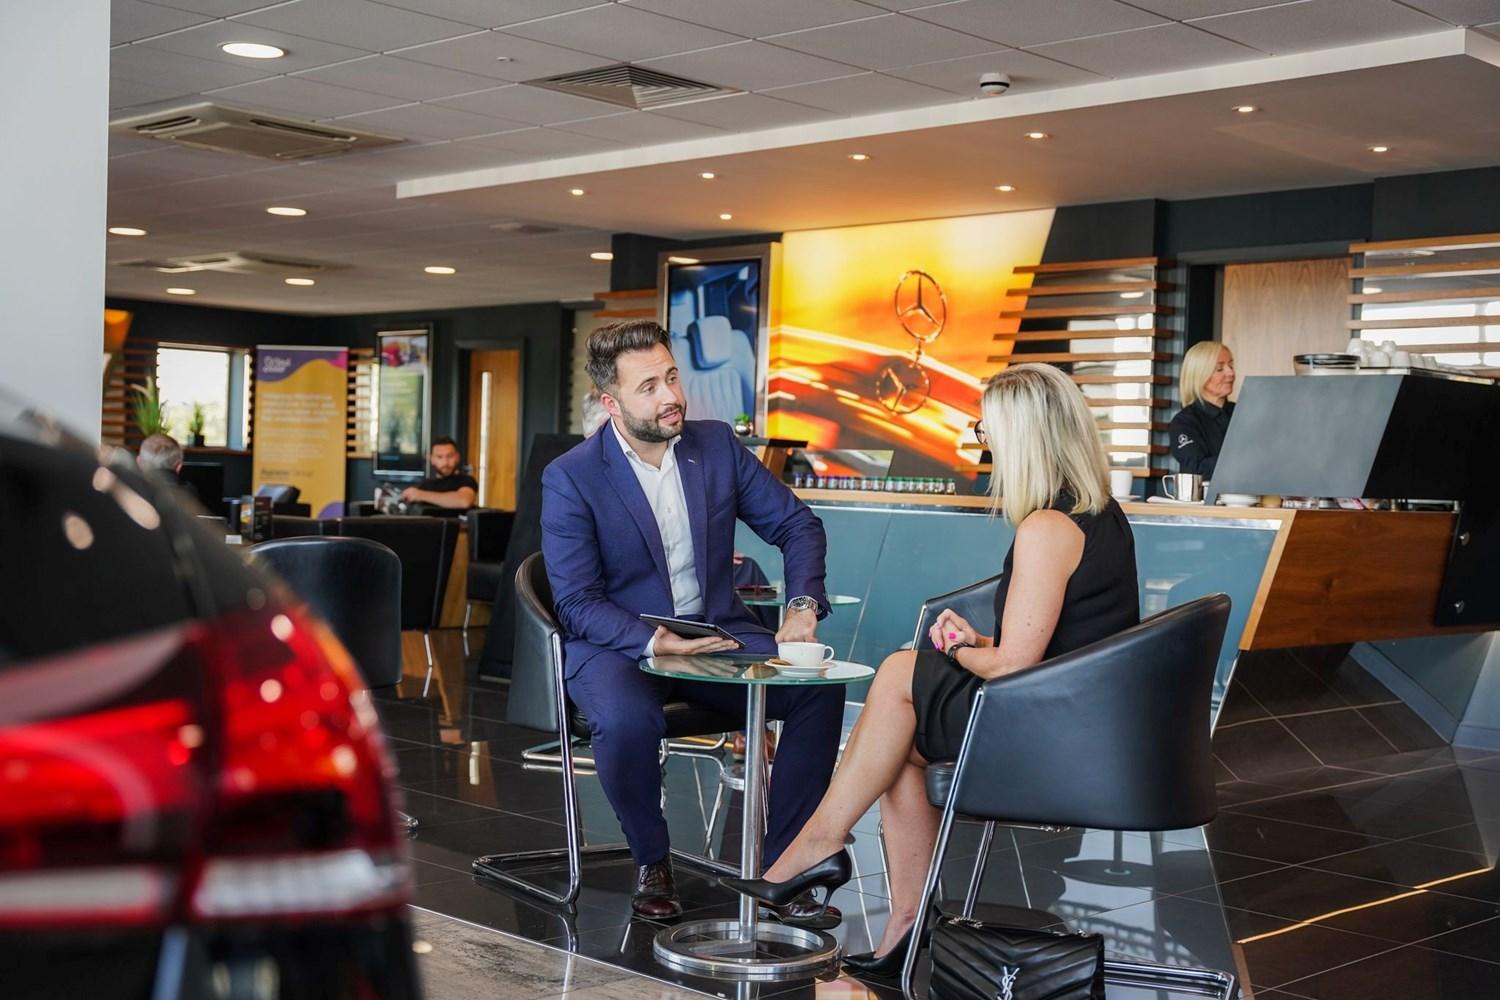 Mercedes-Benz Finance Specialist discusses warranty options with customer enjoying a cup of tea at the Mercedes-Benz of Portadown Showroom